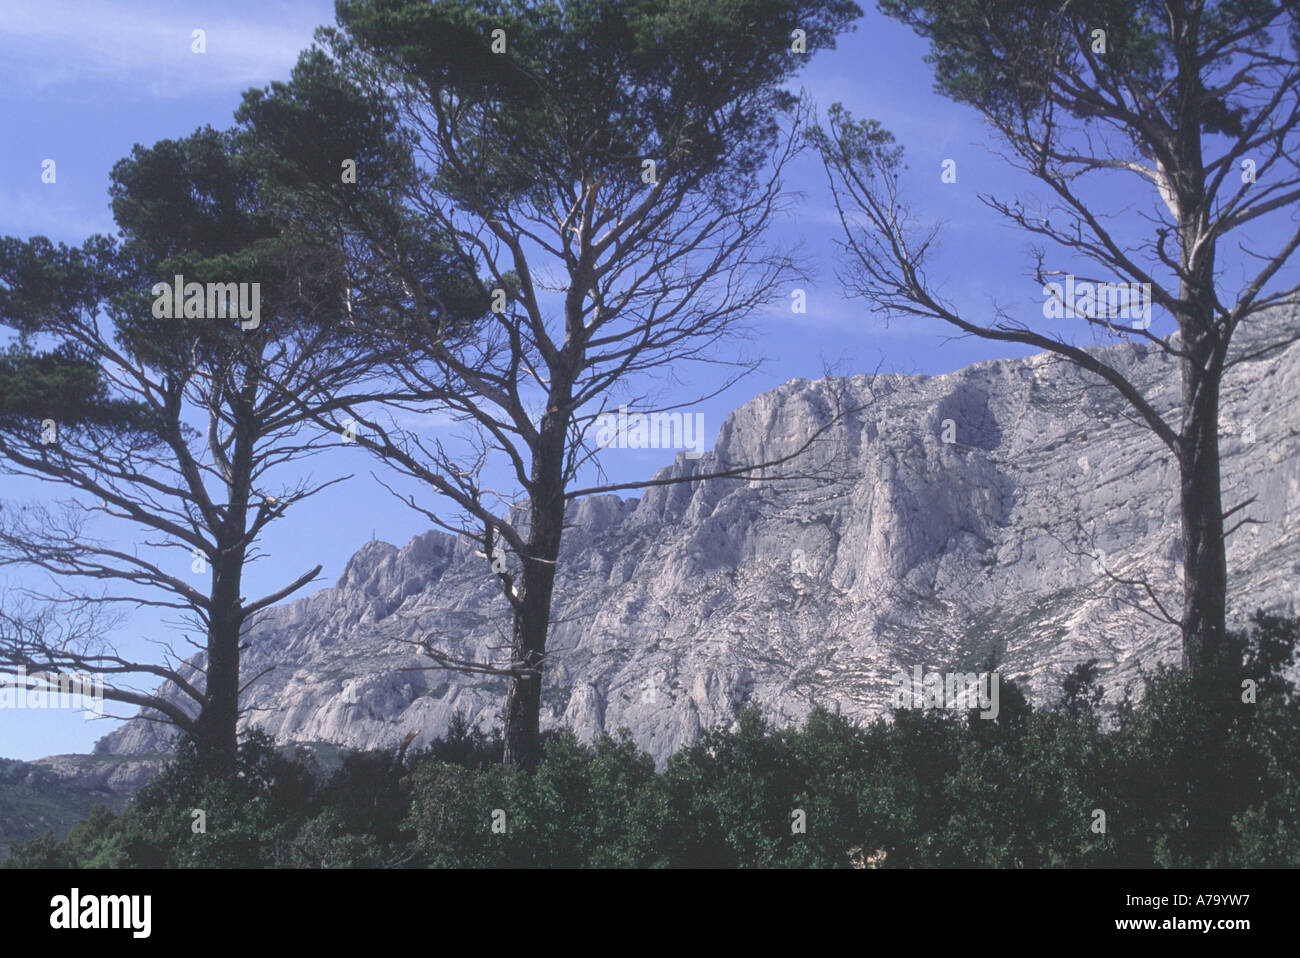 France. Provence. On Le Tholonet .Pine trees and Mount Saint Victoire which Cezanne painted  60 times. Stock Photo